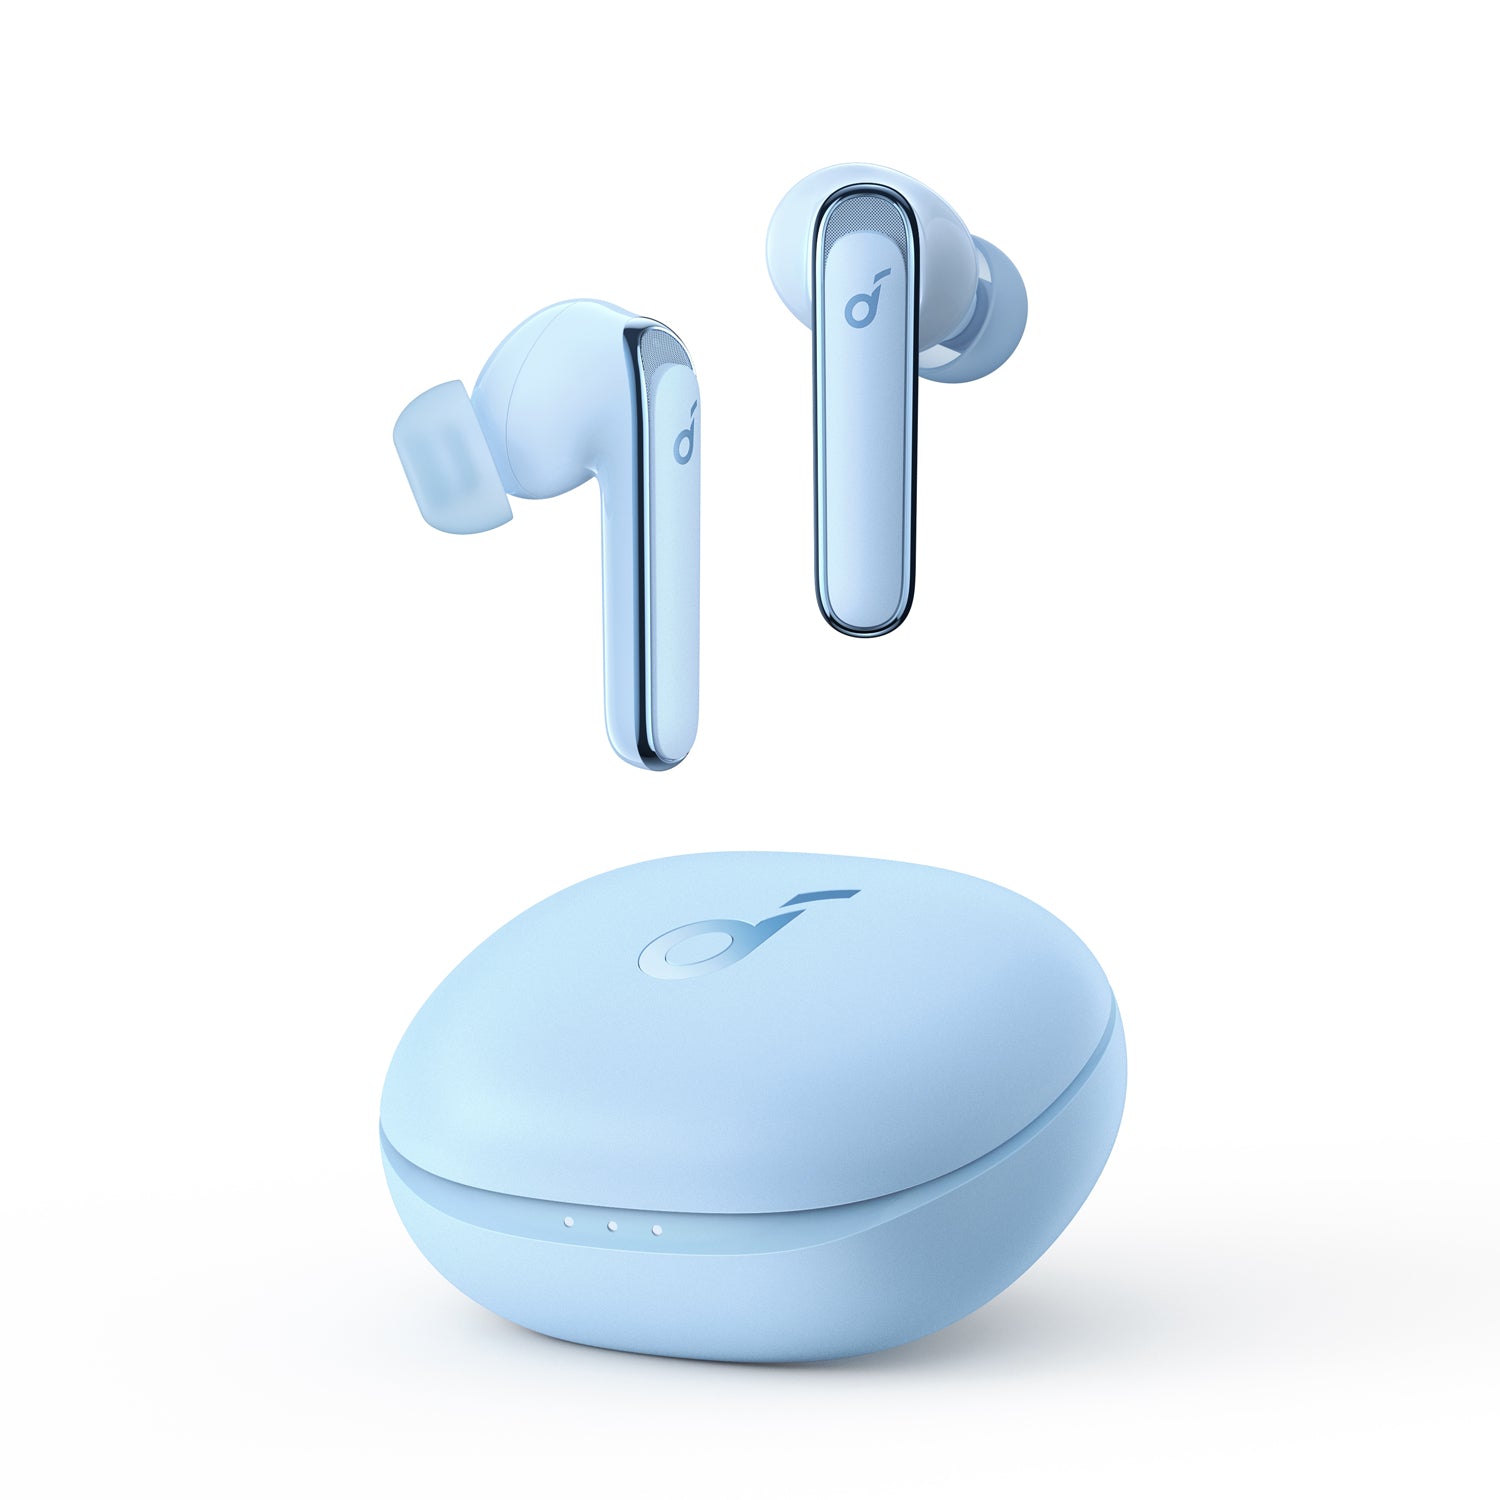 Life P3, Noise Cancelling Earbuds - soundcore US